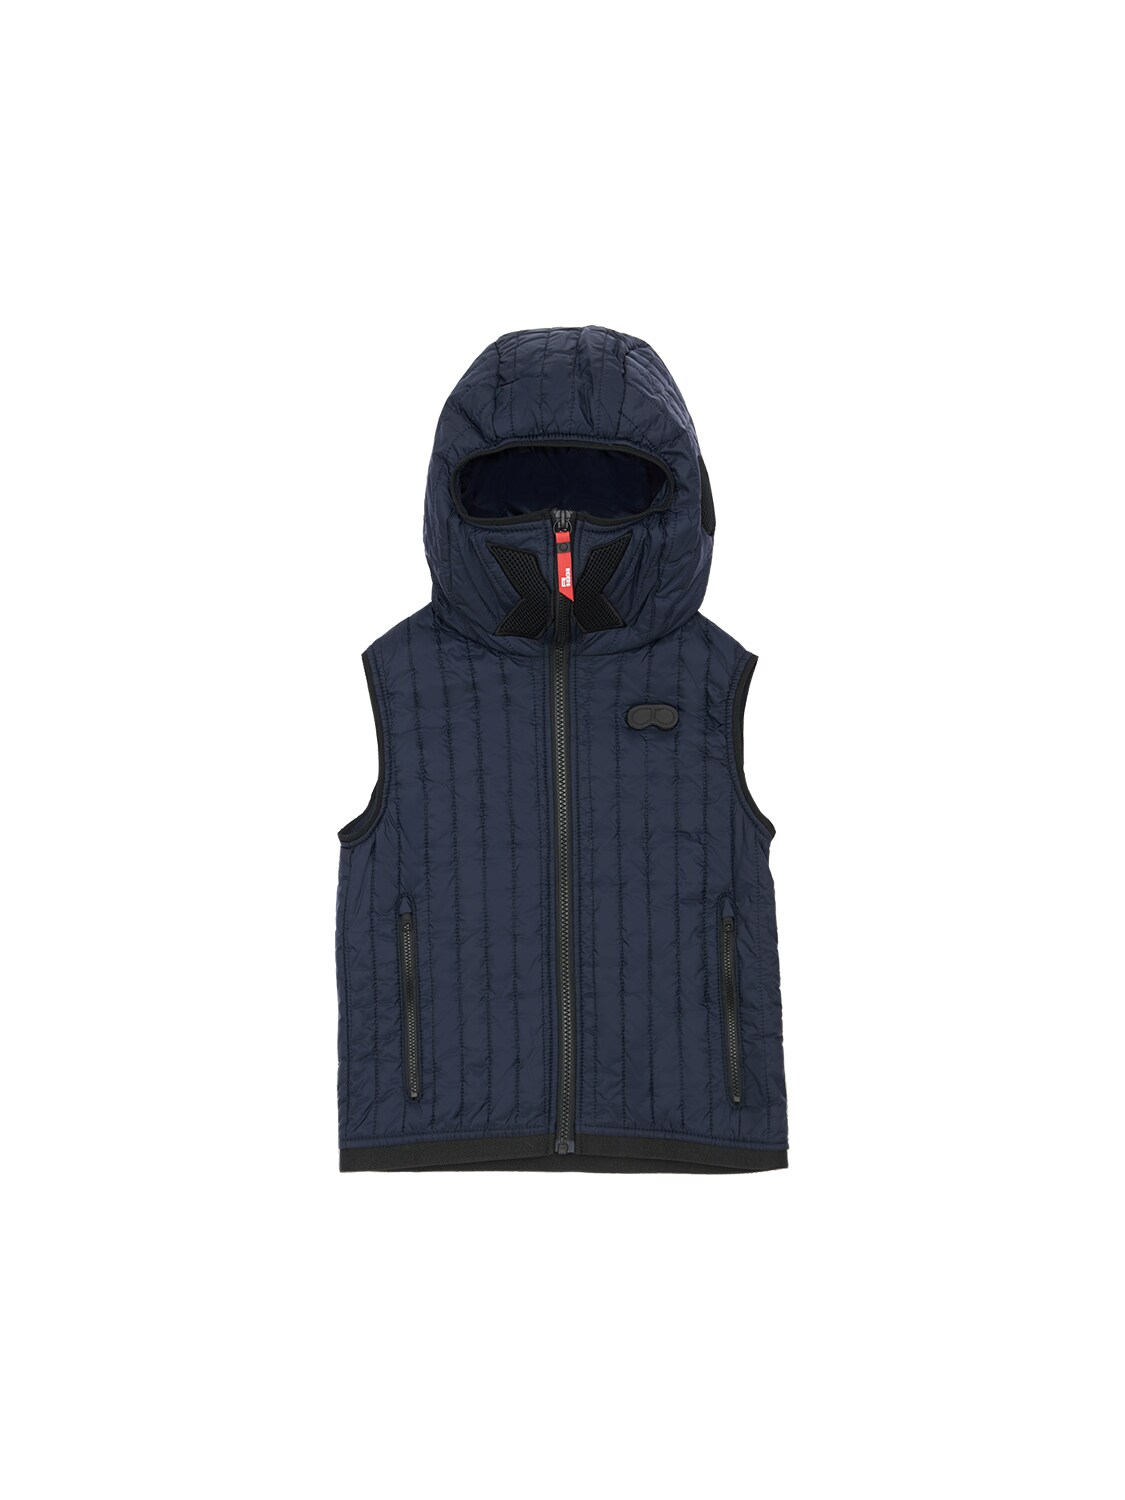 Ai Riders On The Storm Kids' Hooded Nylon Puffer Vest W/ Lenses In Navy